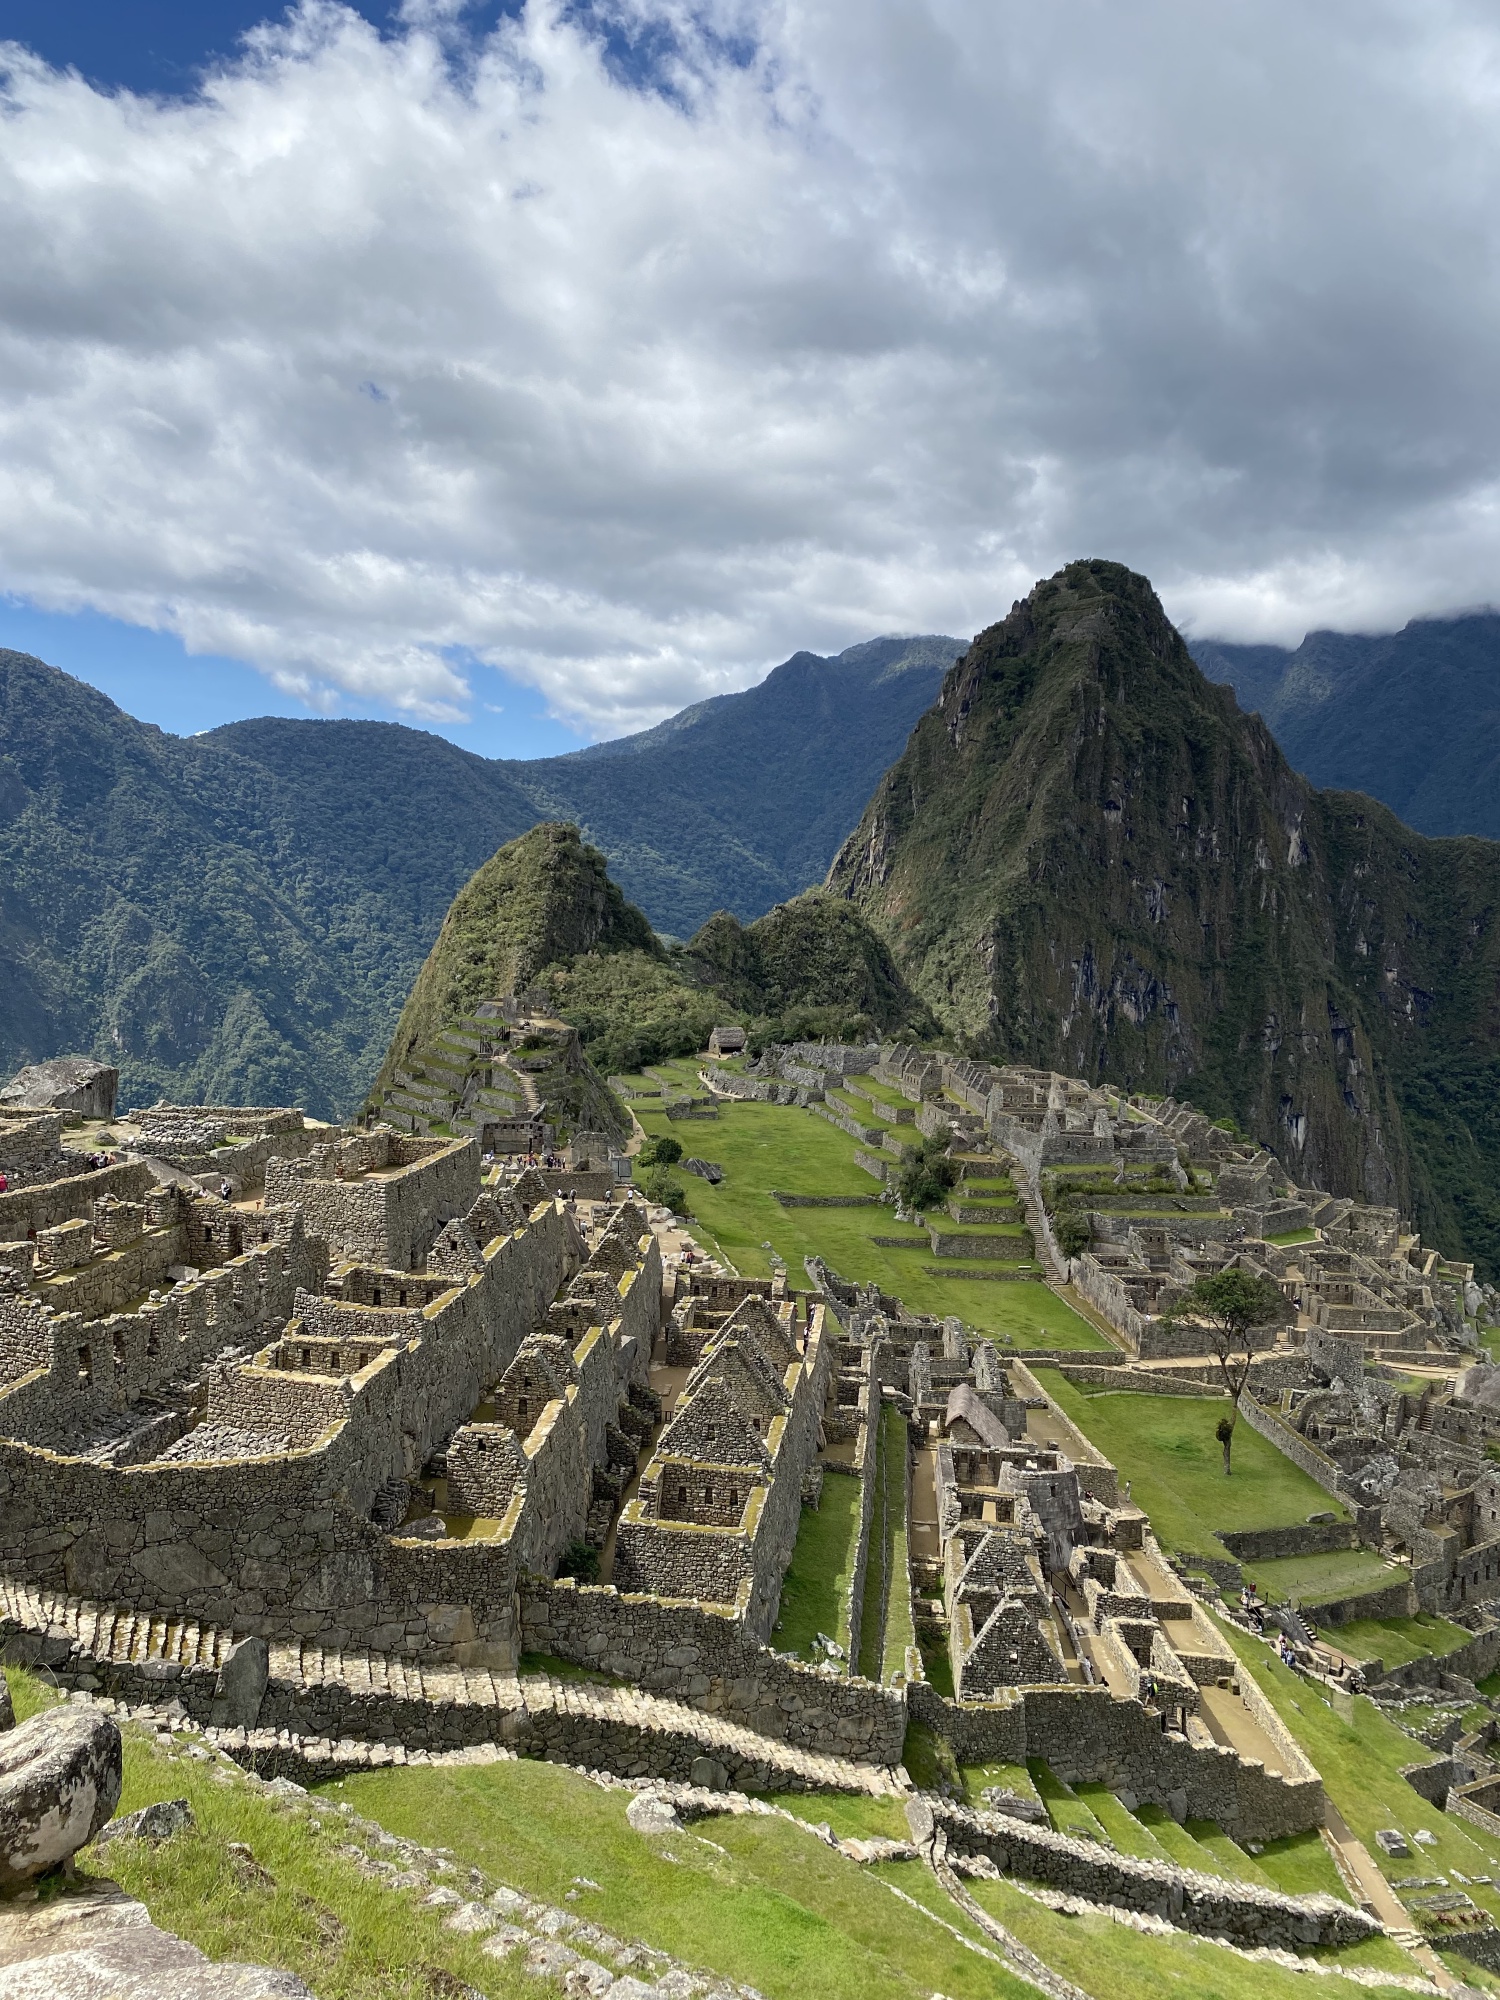 FACTS - the smaller mountain here is called the *Huayna Picchu*, or *young mountain* and the bigger moutain is called *Machu Picchu* or *old mountain*